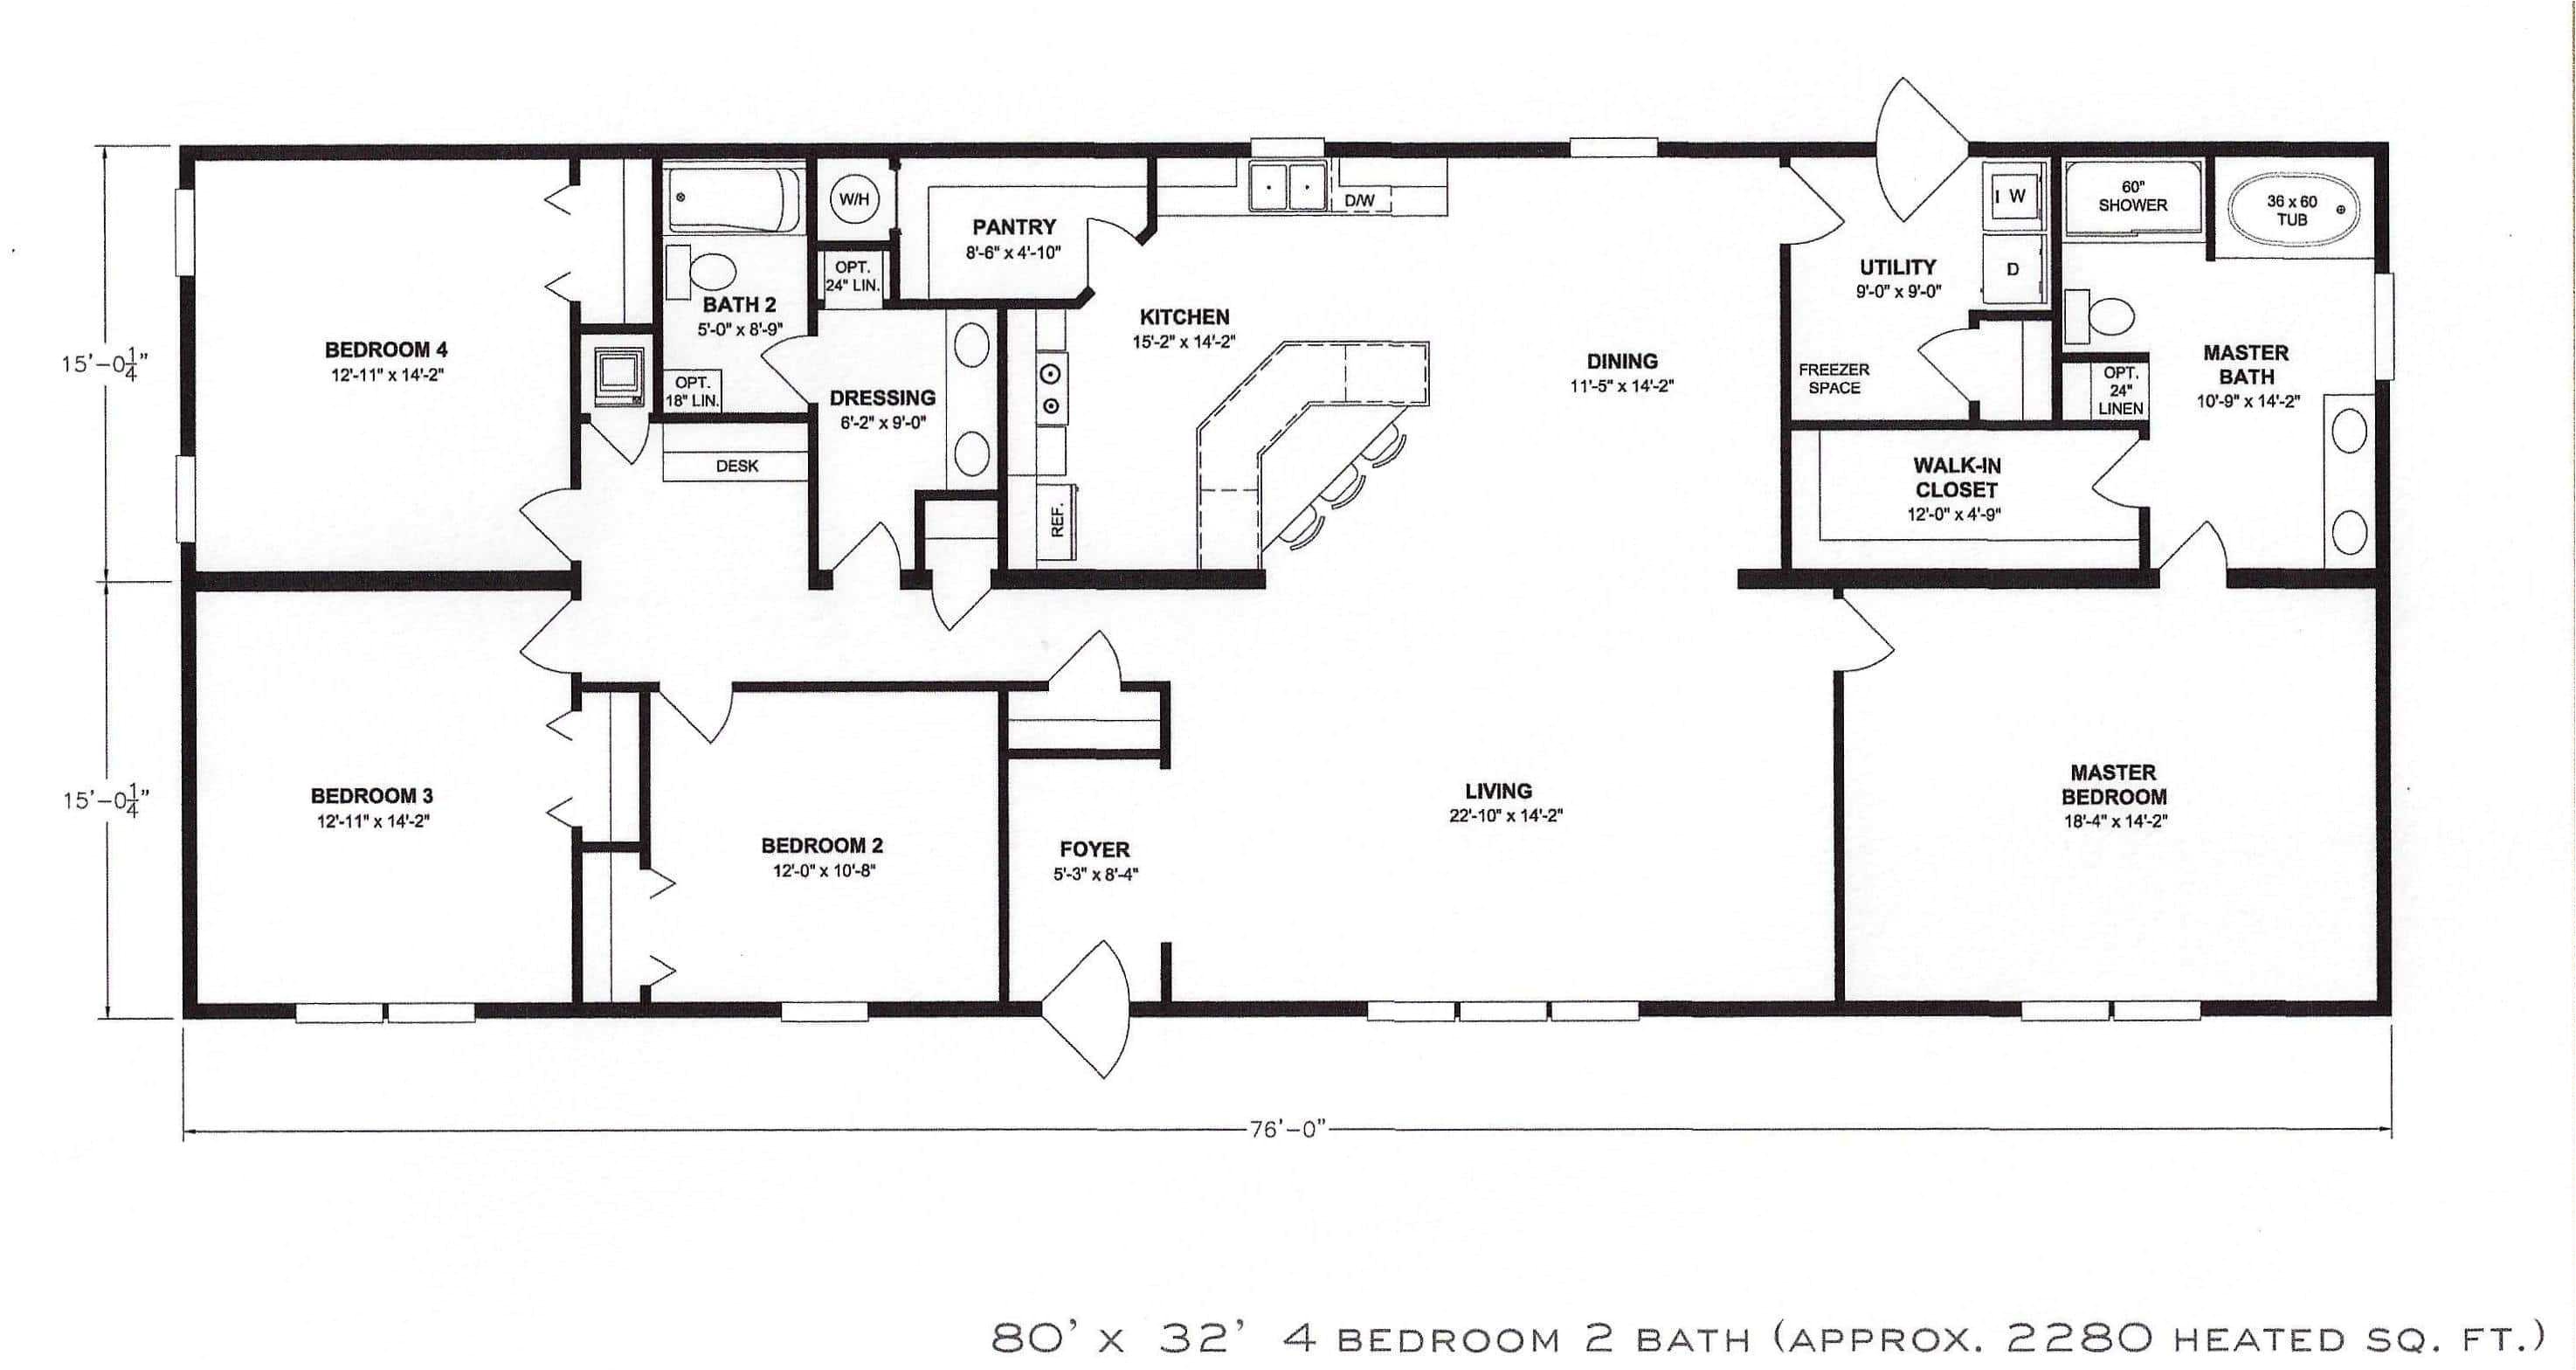 6 bedroom ranch house plans with 6 bedroom modular homes